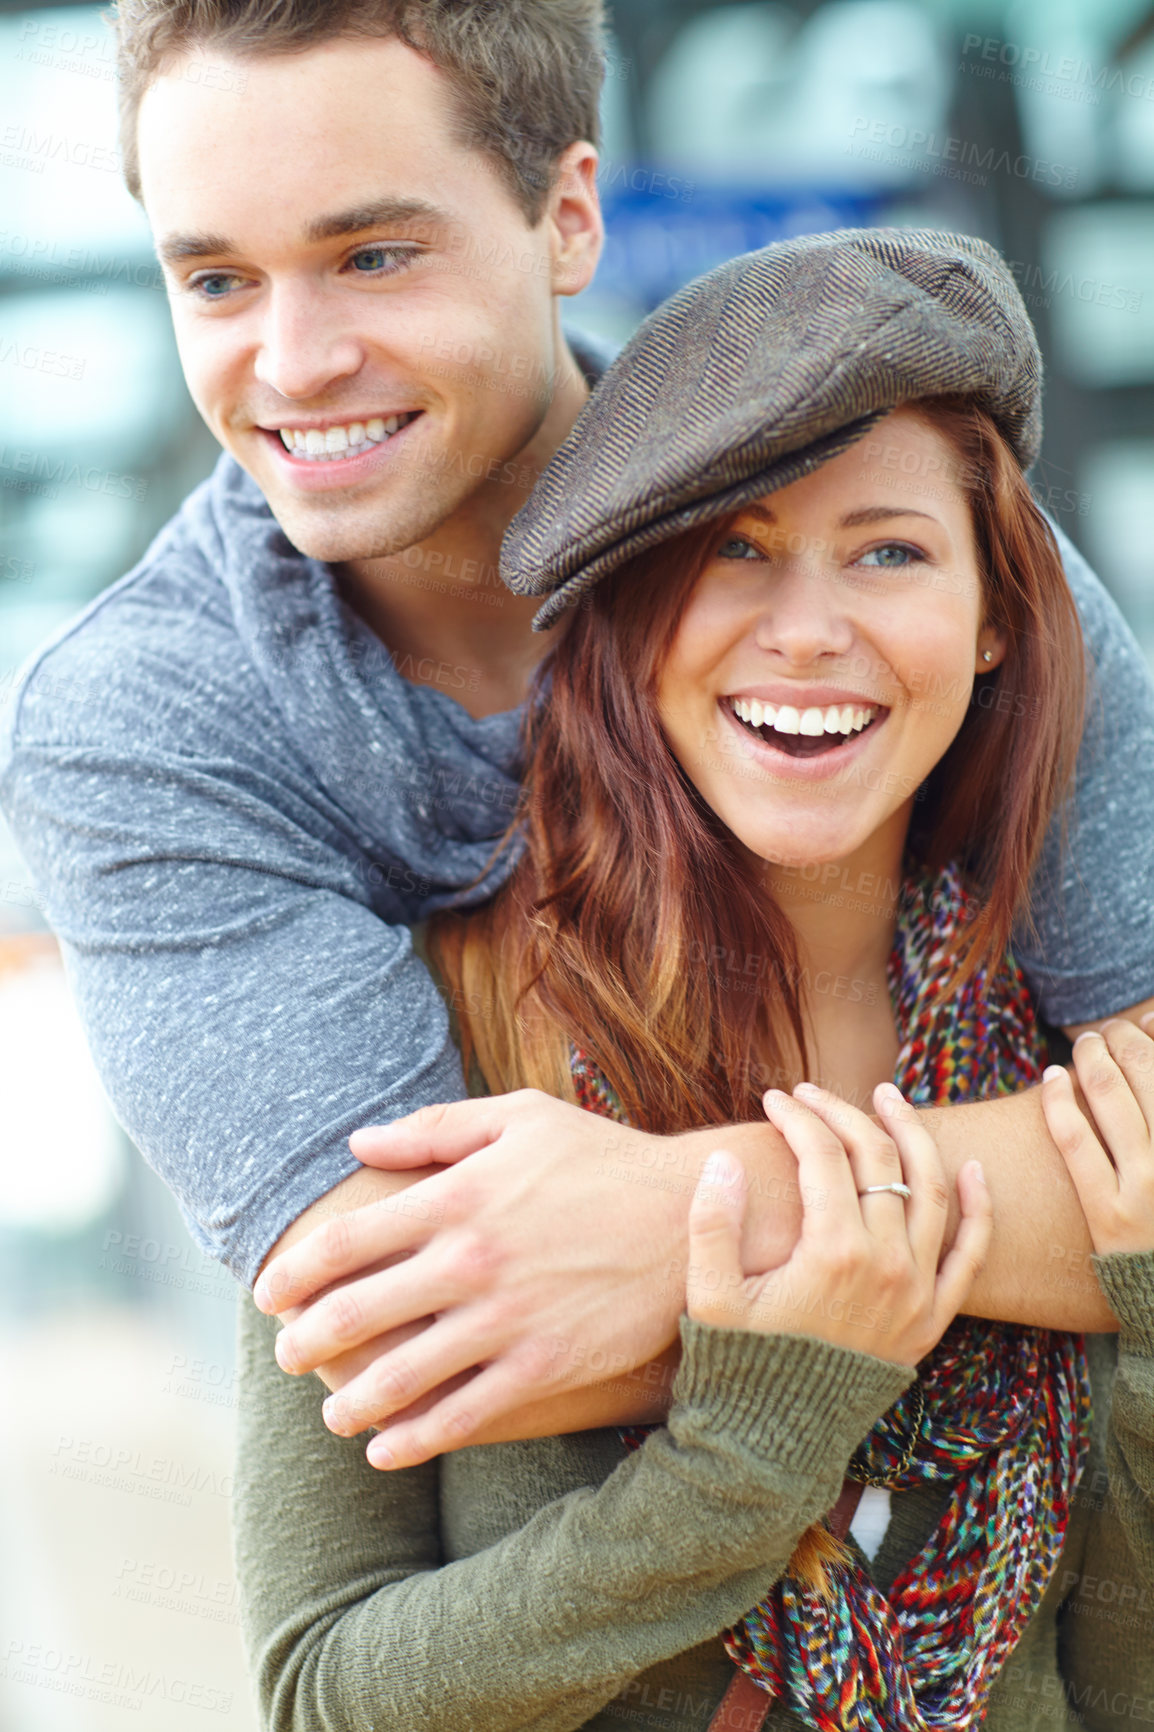 Buy stock photo A couple at a train station laughing together